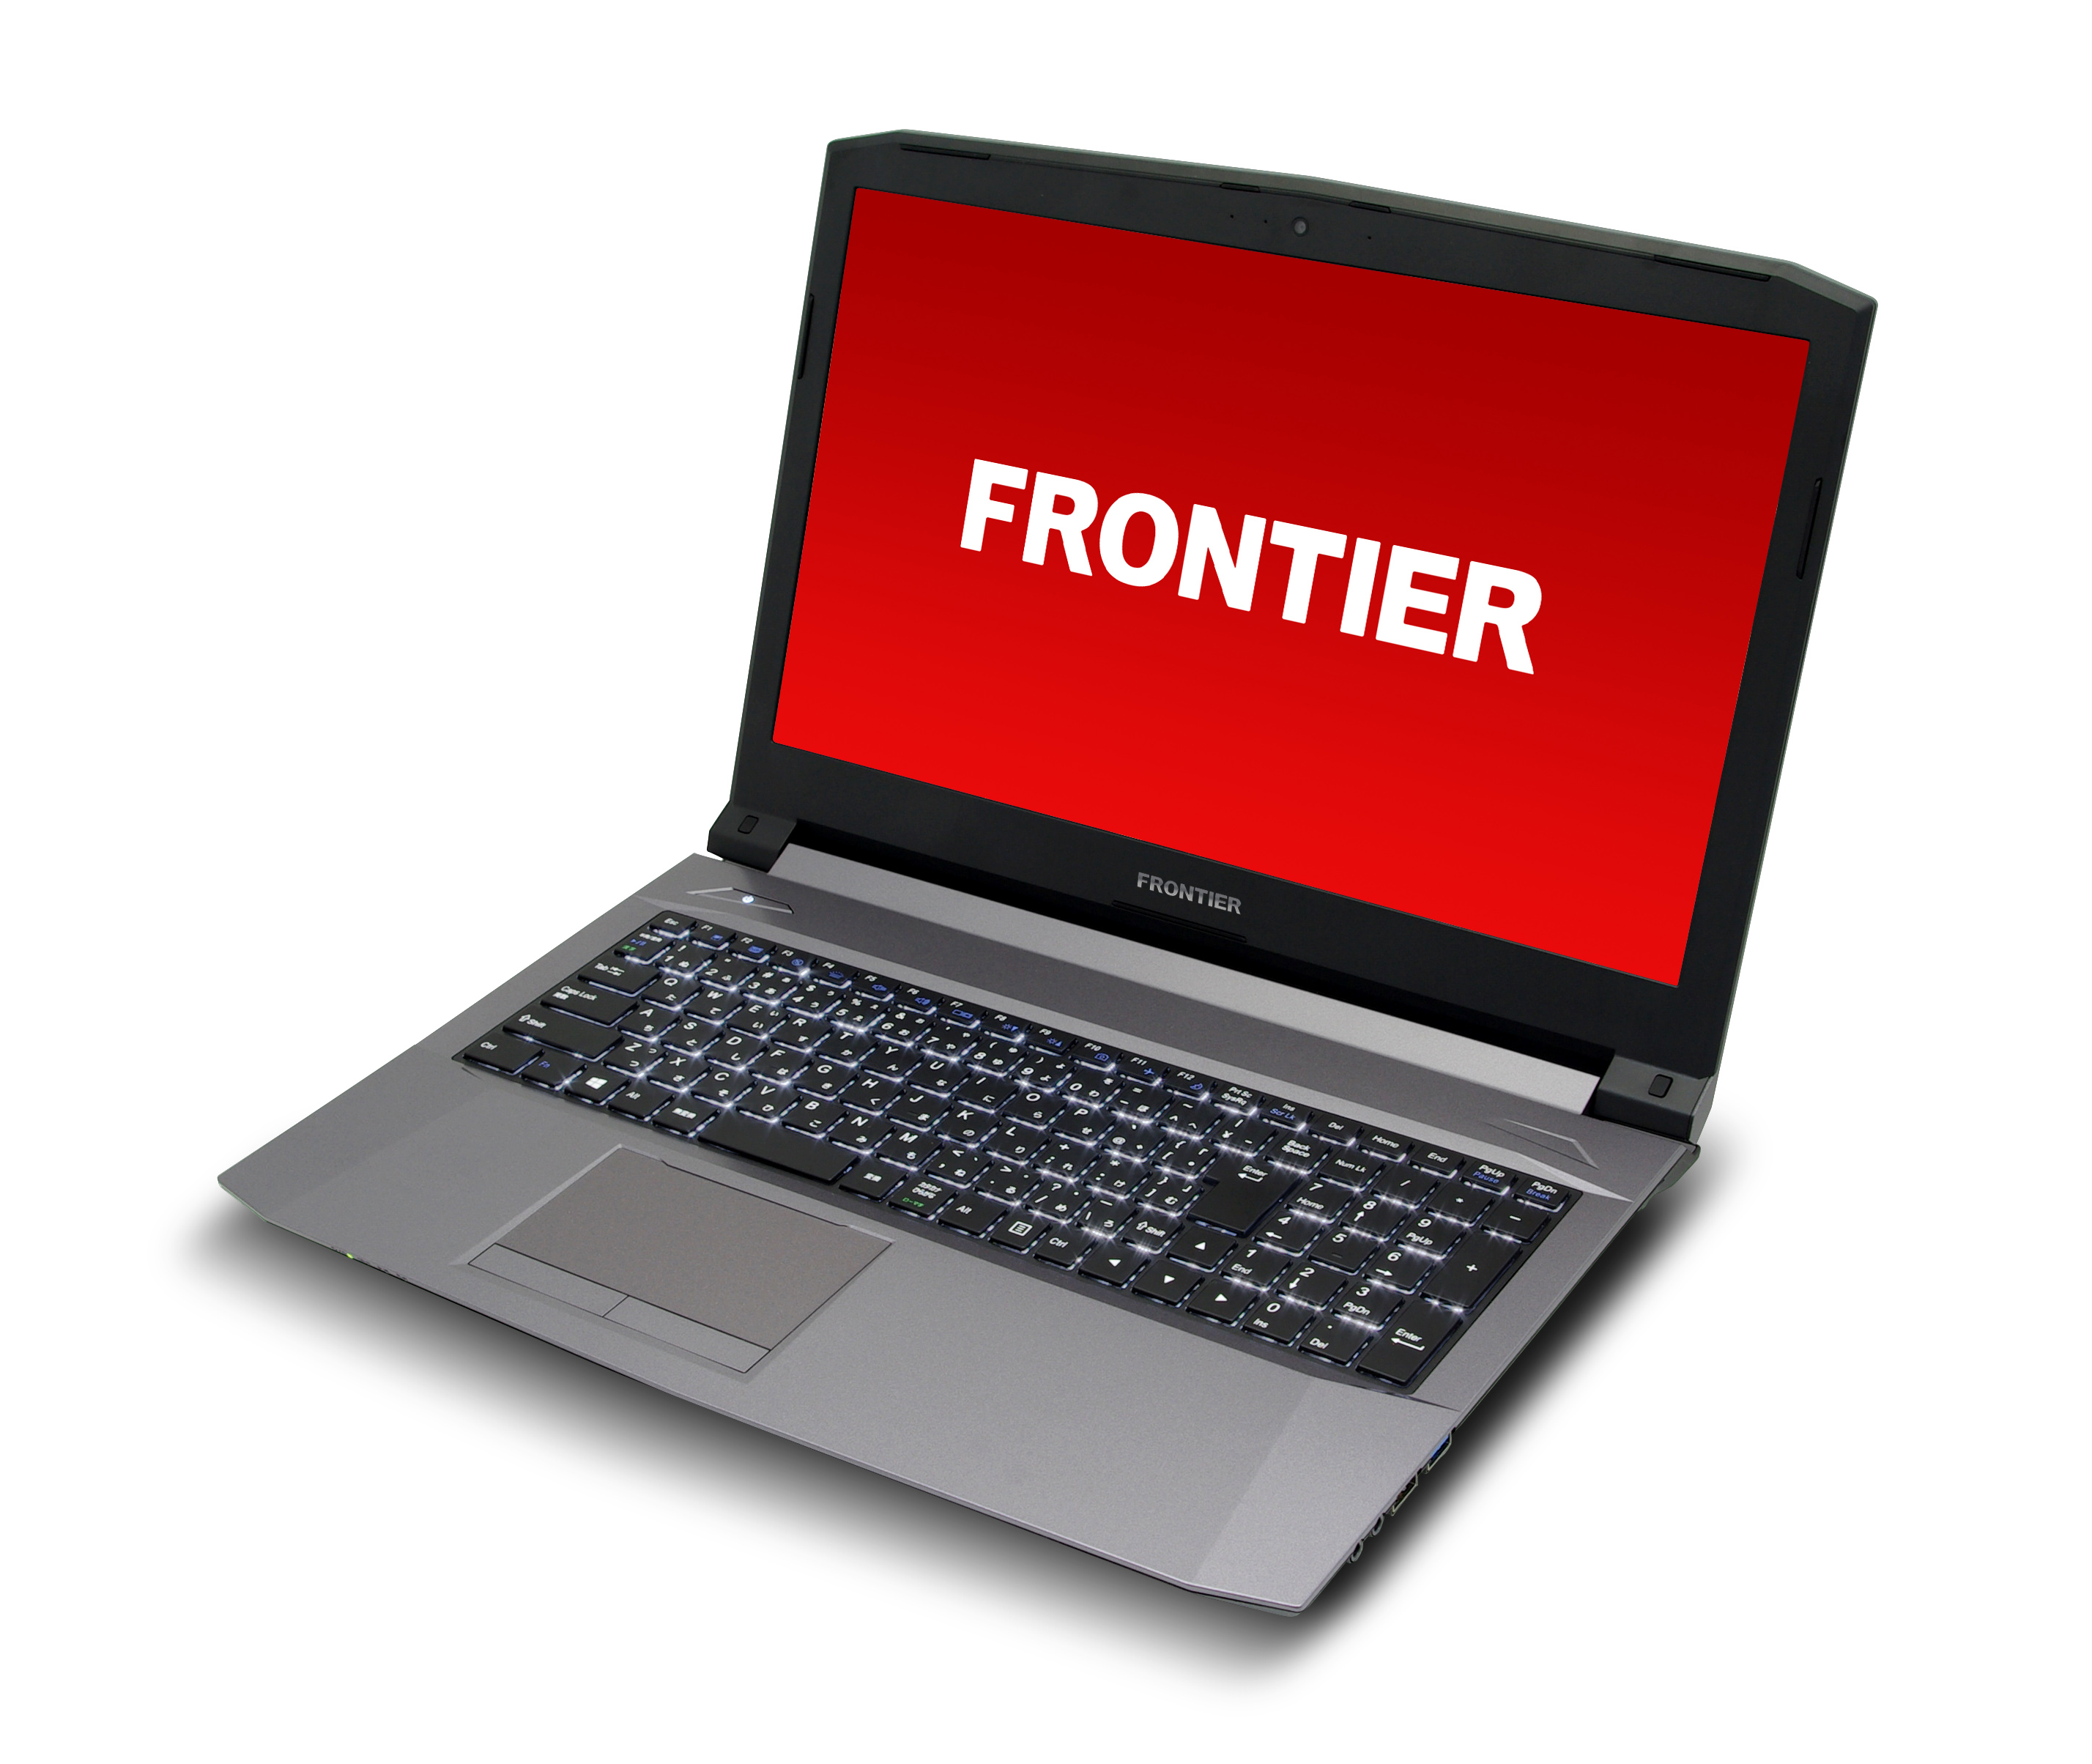 FRONTIER、6コア/12スレッドのCore i7-8750H搭載15.6型ノート - PC Watch